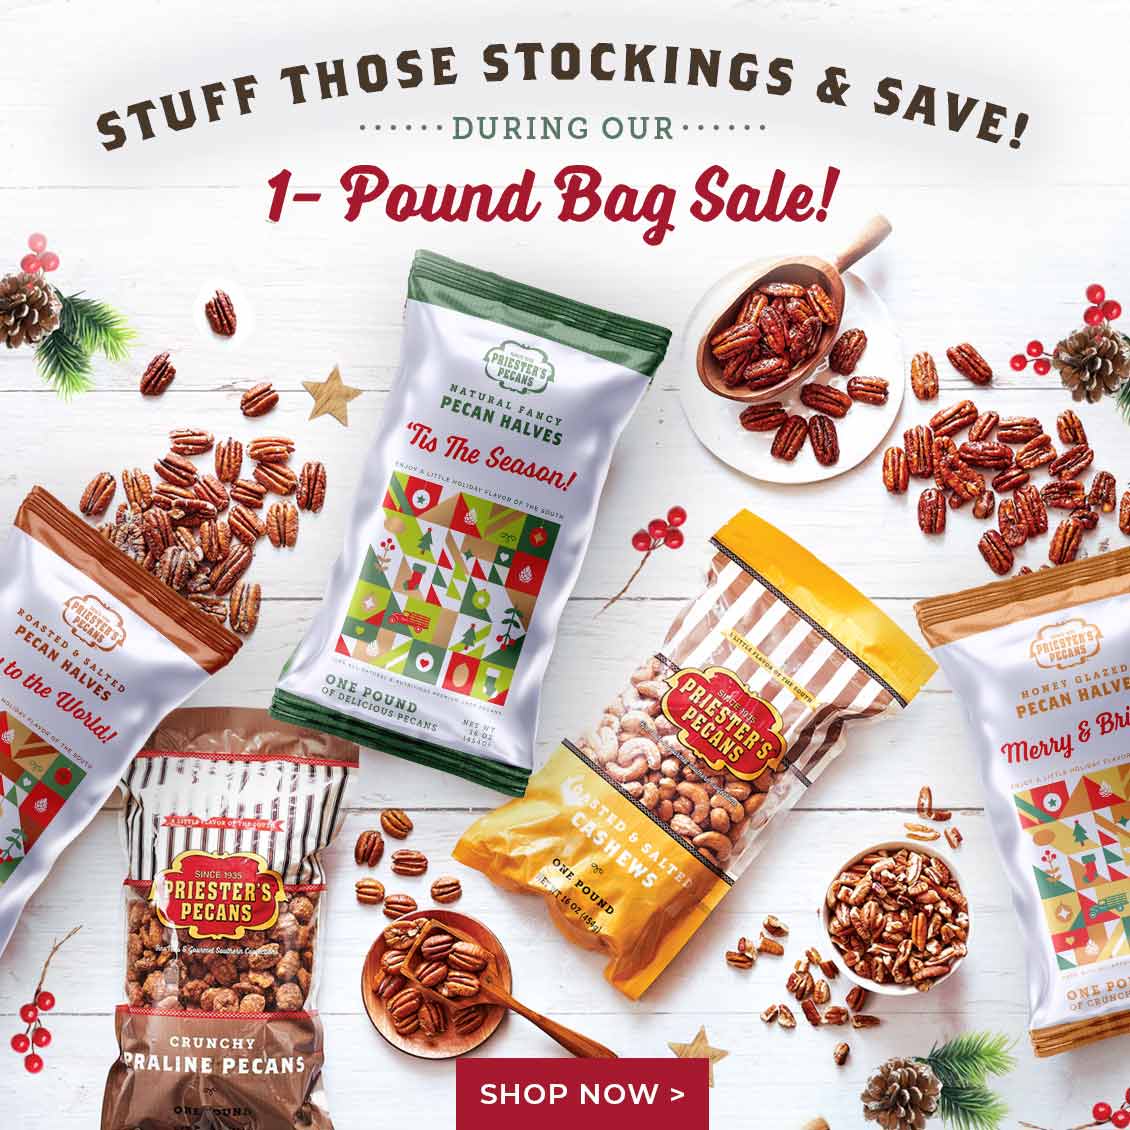 Stocking Stuffer SALE • Up to 30% OFF 1-Lb. Bags
